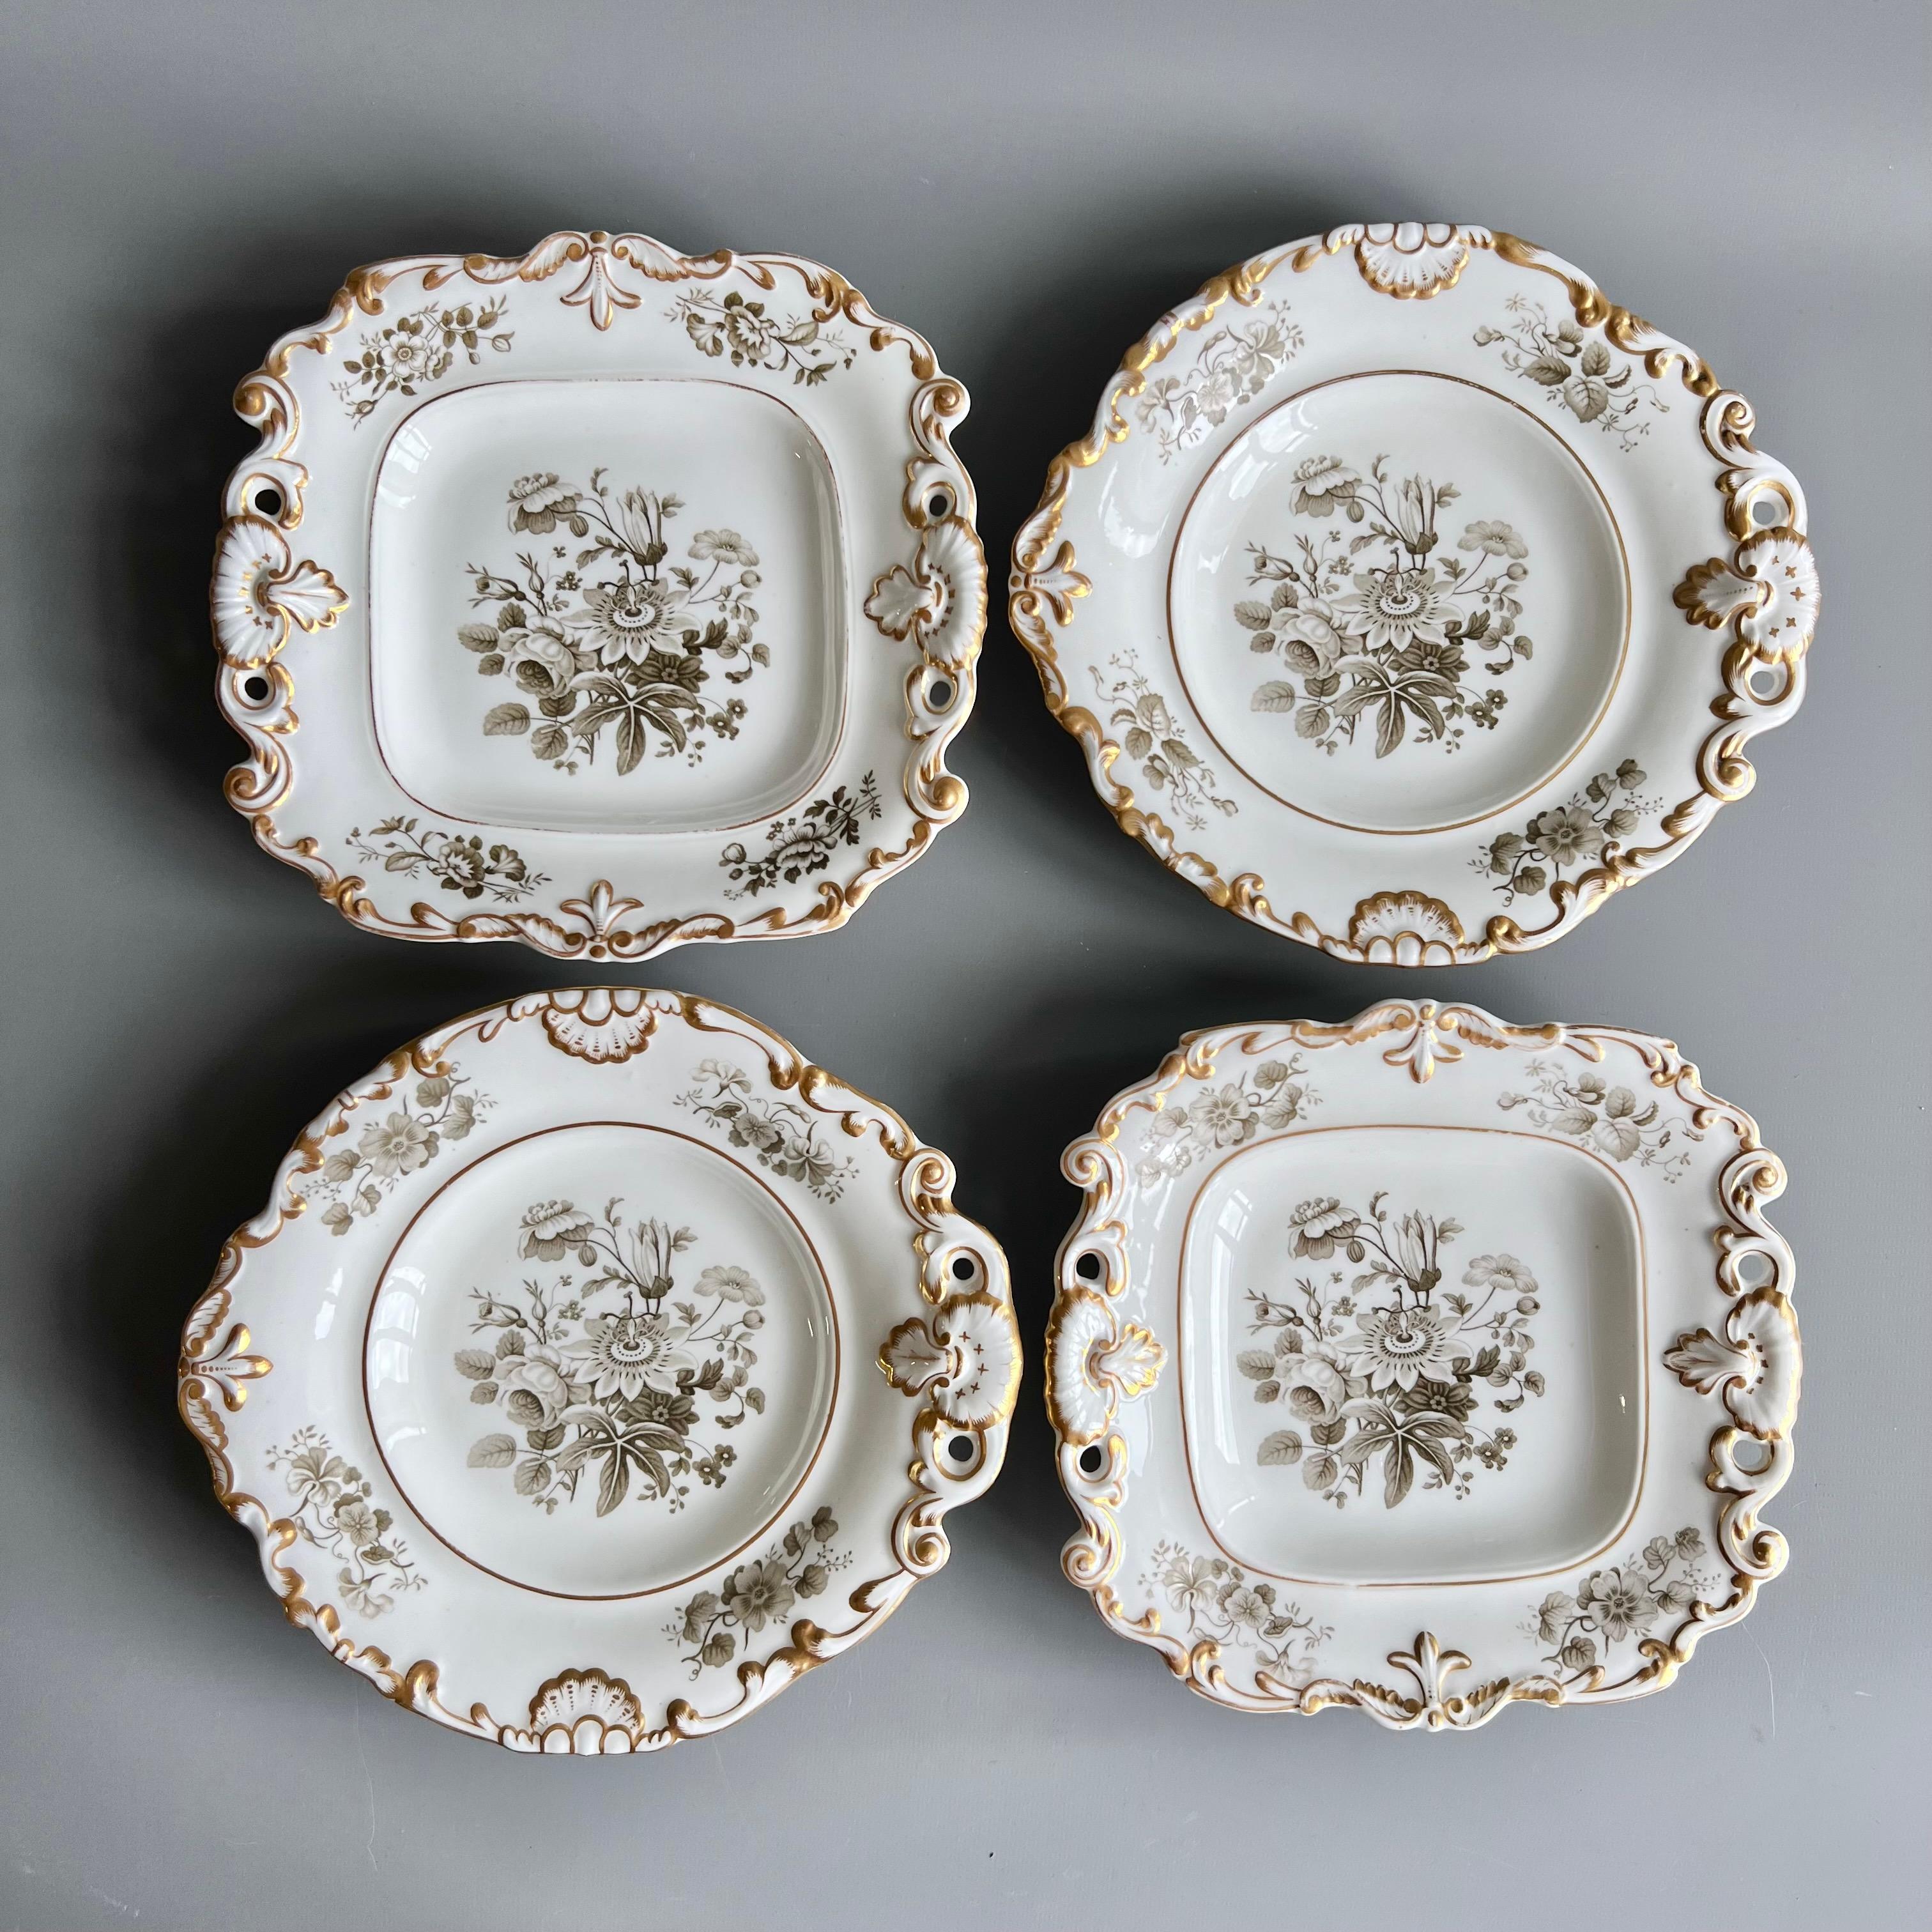 Hand-Painted Minton Dessert Service, Inverted Shell White with Monochrome Flowers, ca 1830 For Sale